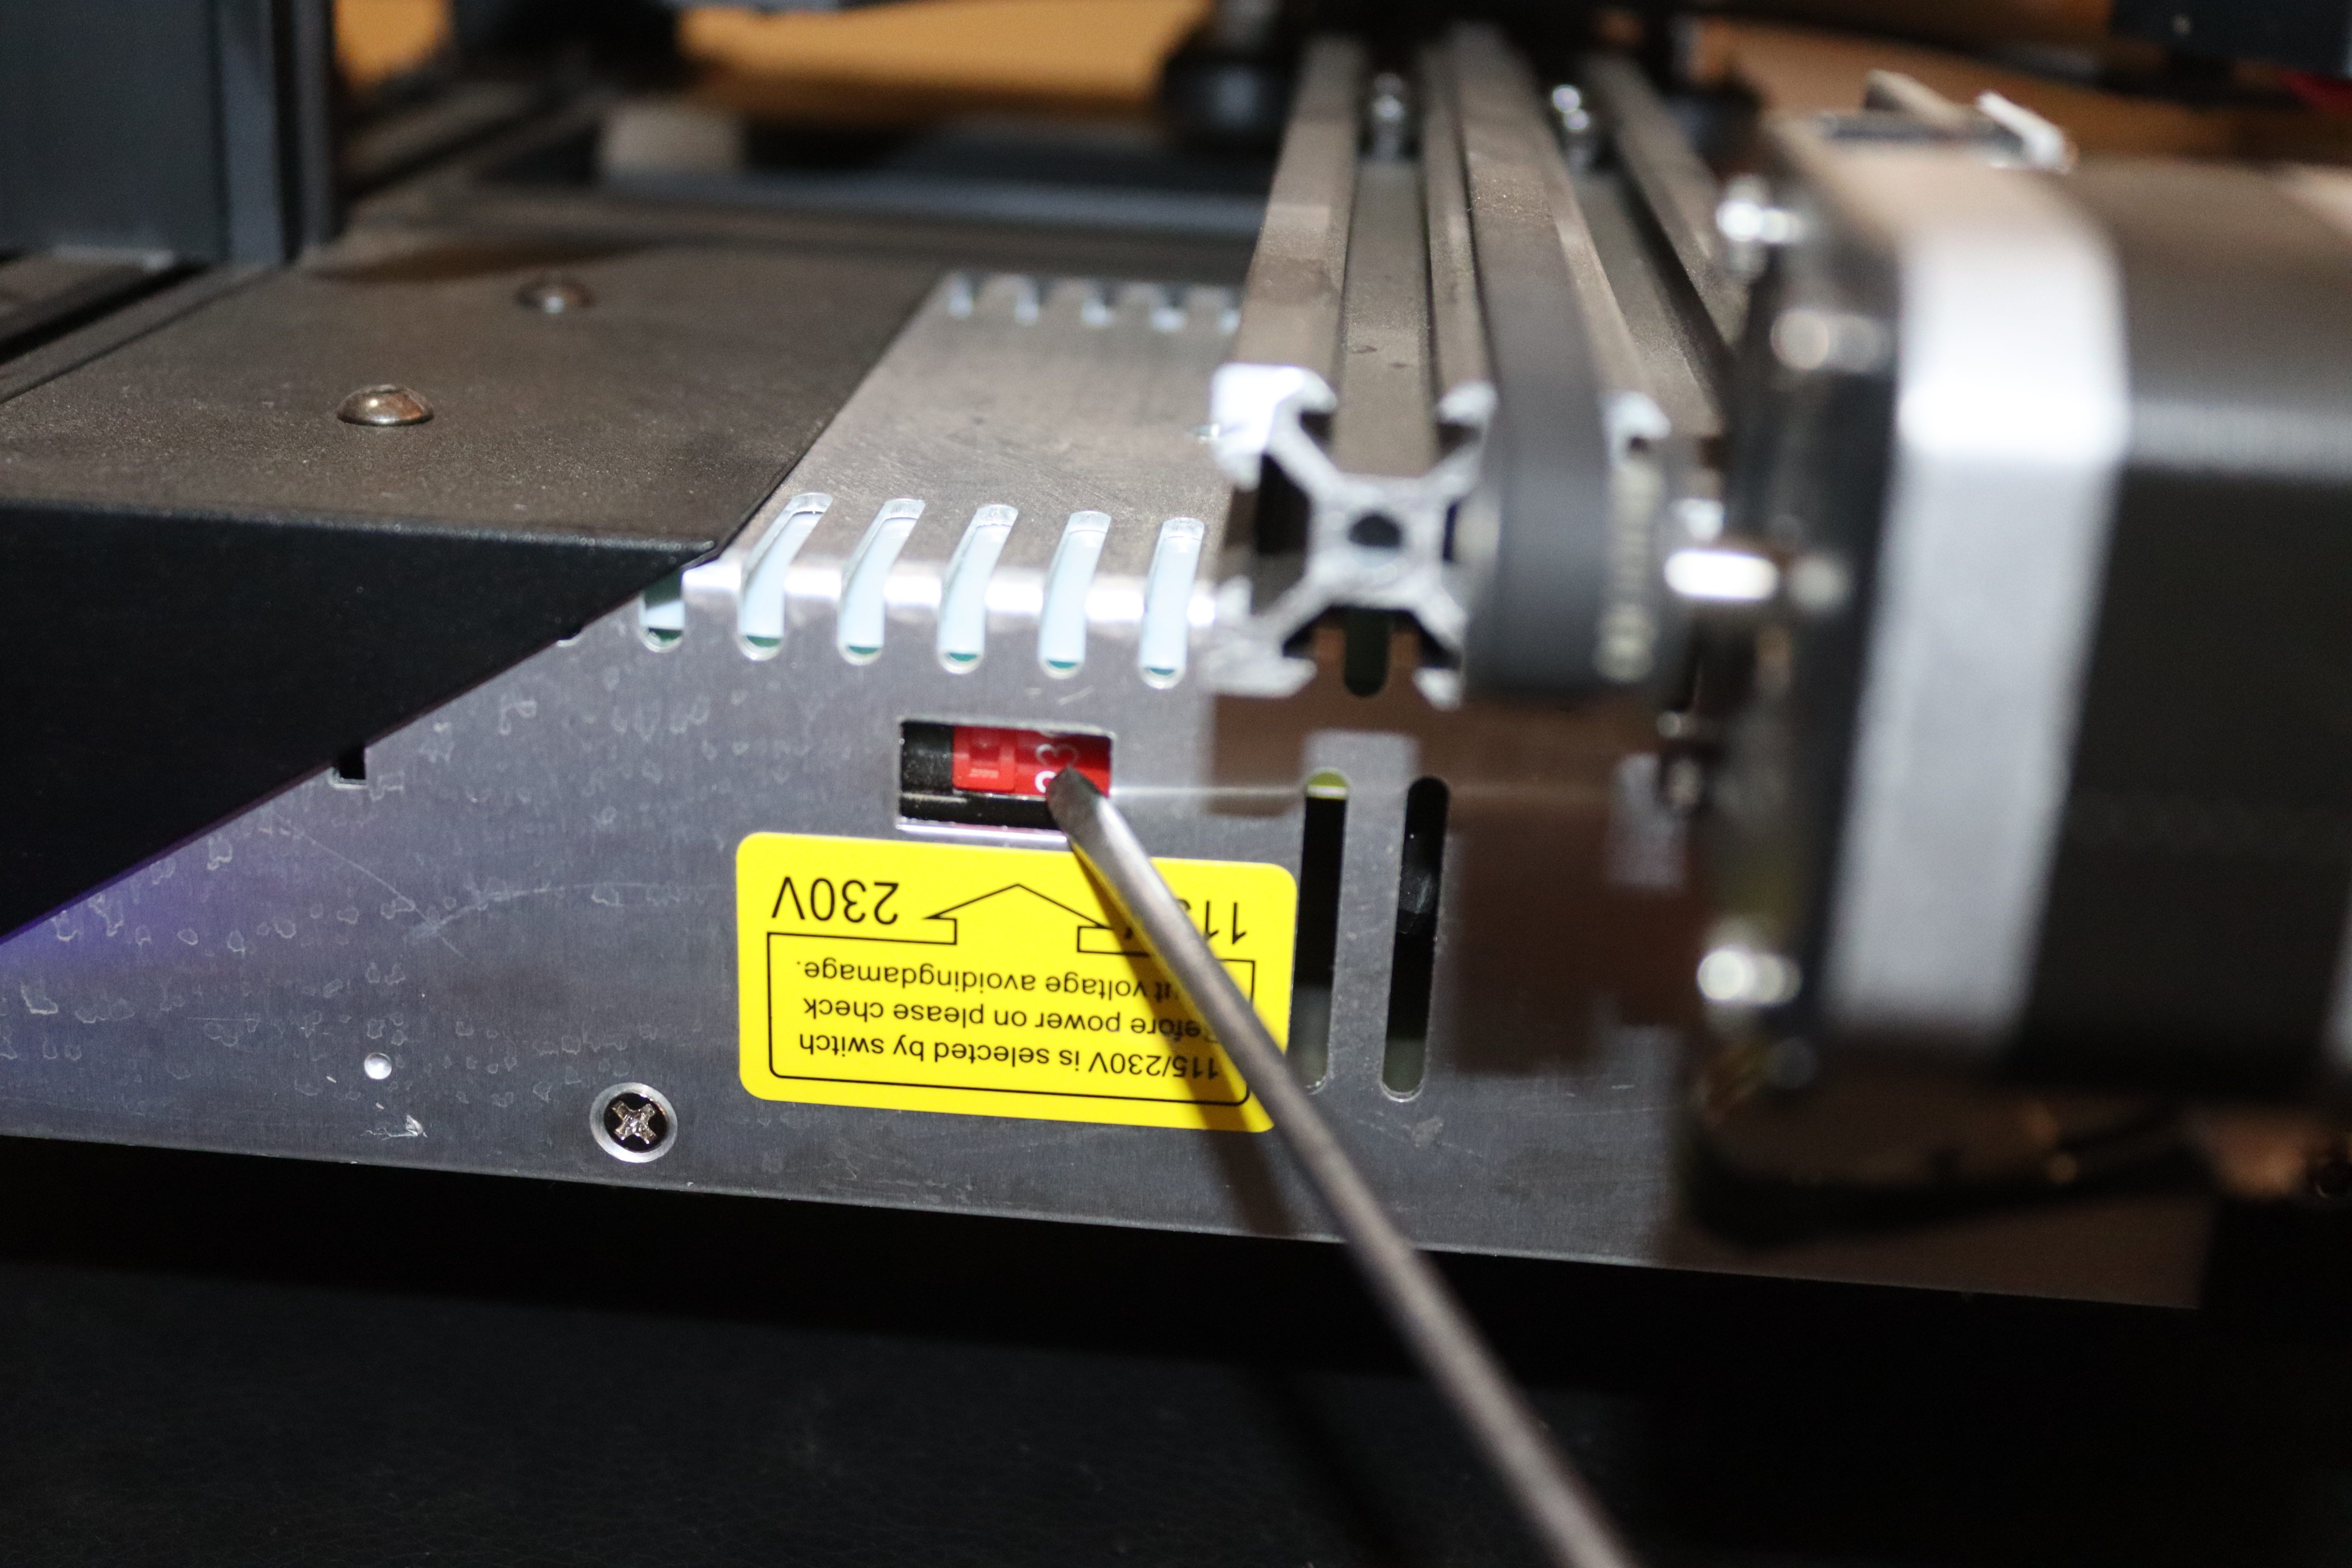 Using a screwdriver to change the voltage of the printer